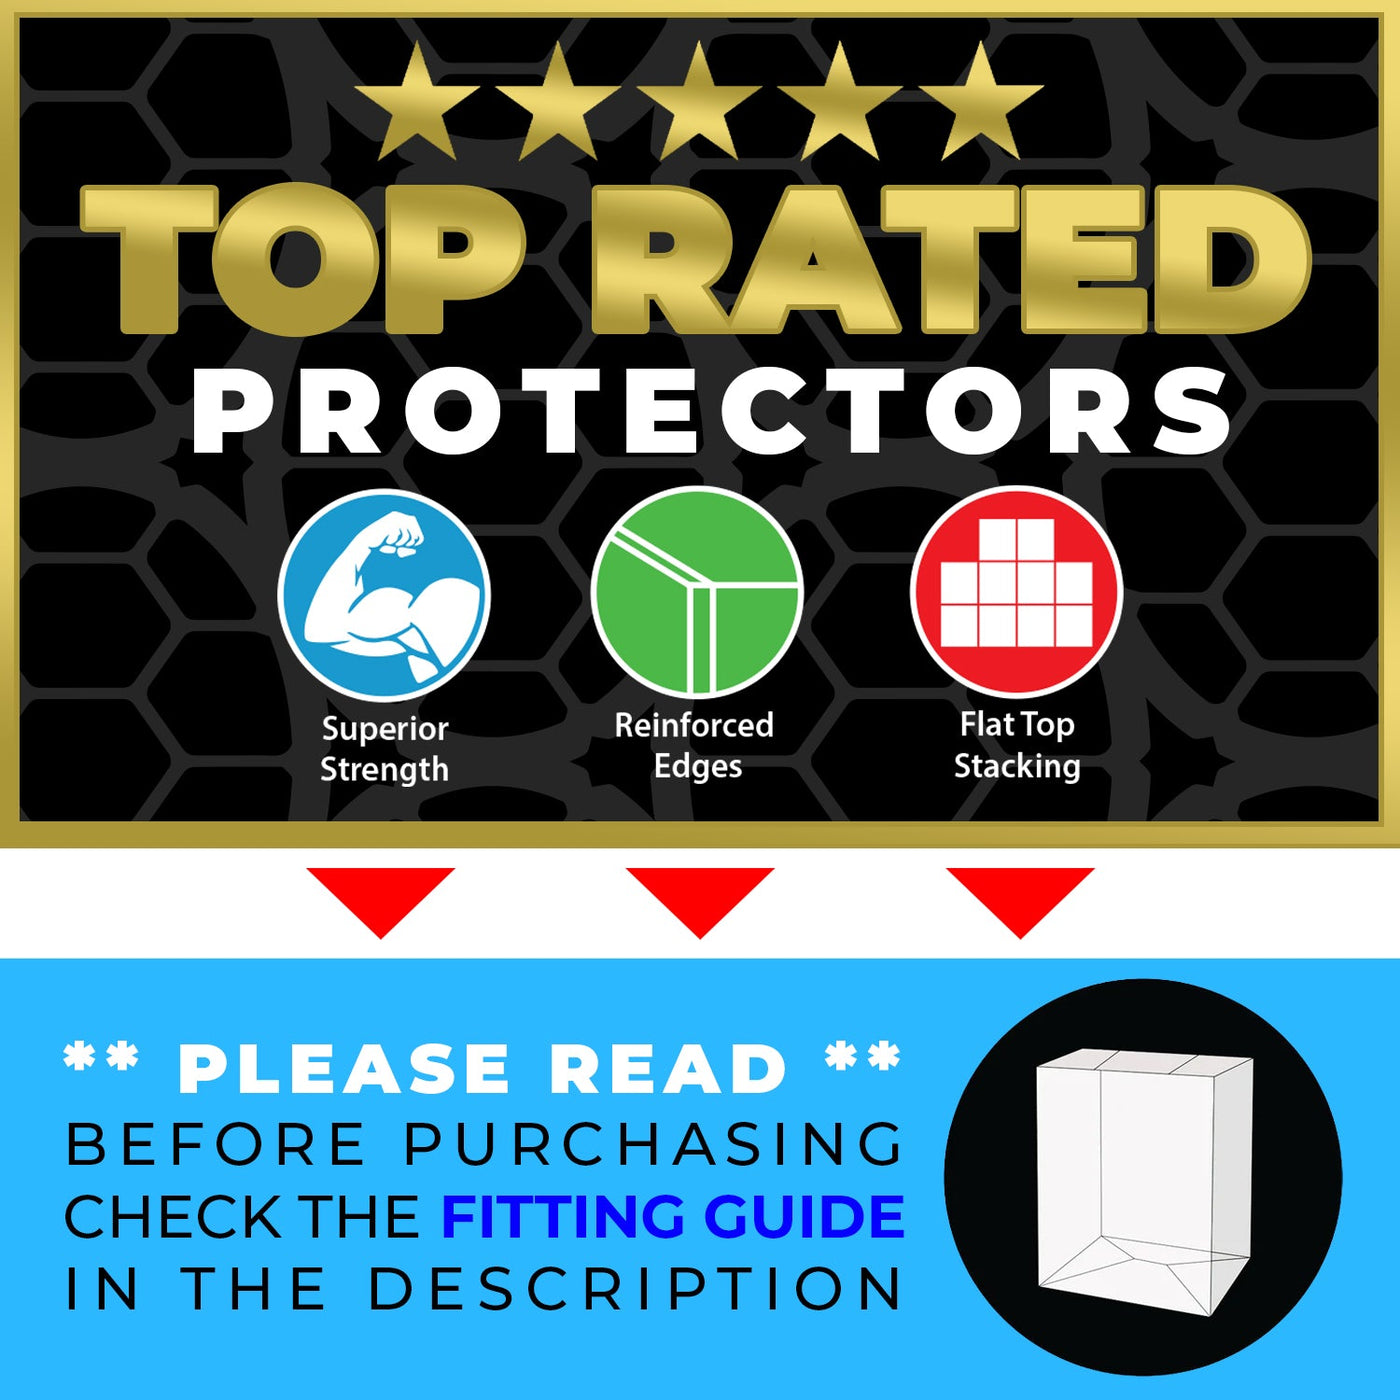 8 pack mickey and friends best funko pop protectors thick strong uv scratch flat top stack vinyl display geek plastic shield vaulted eco armor fits collect protect display case kollector protector